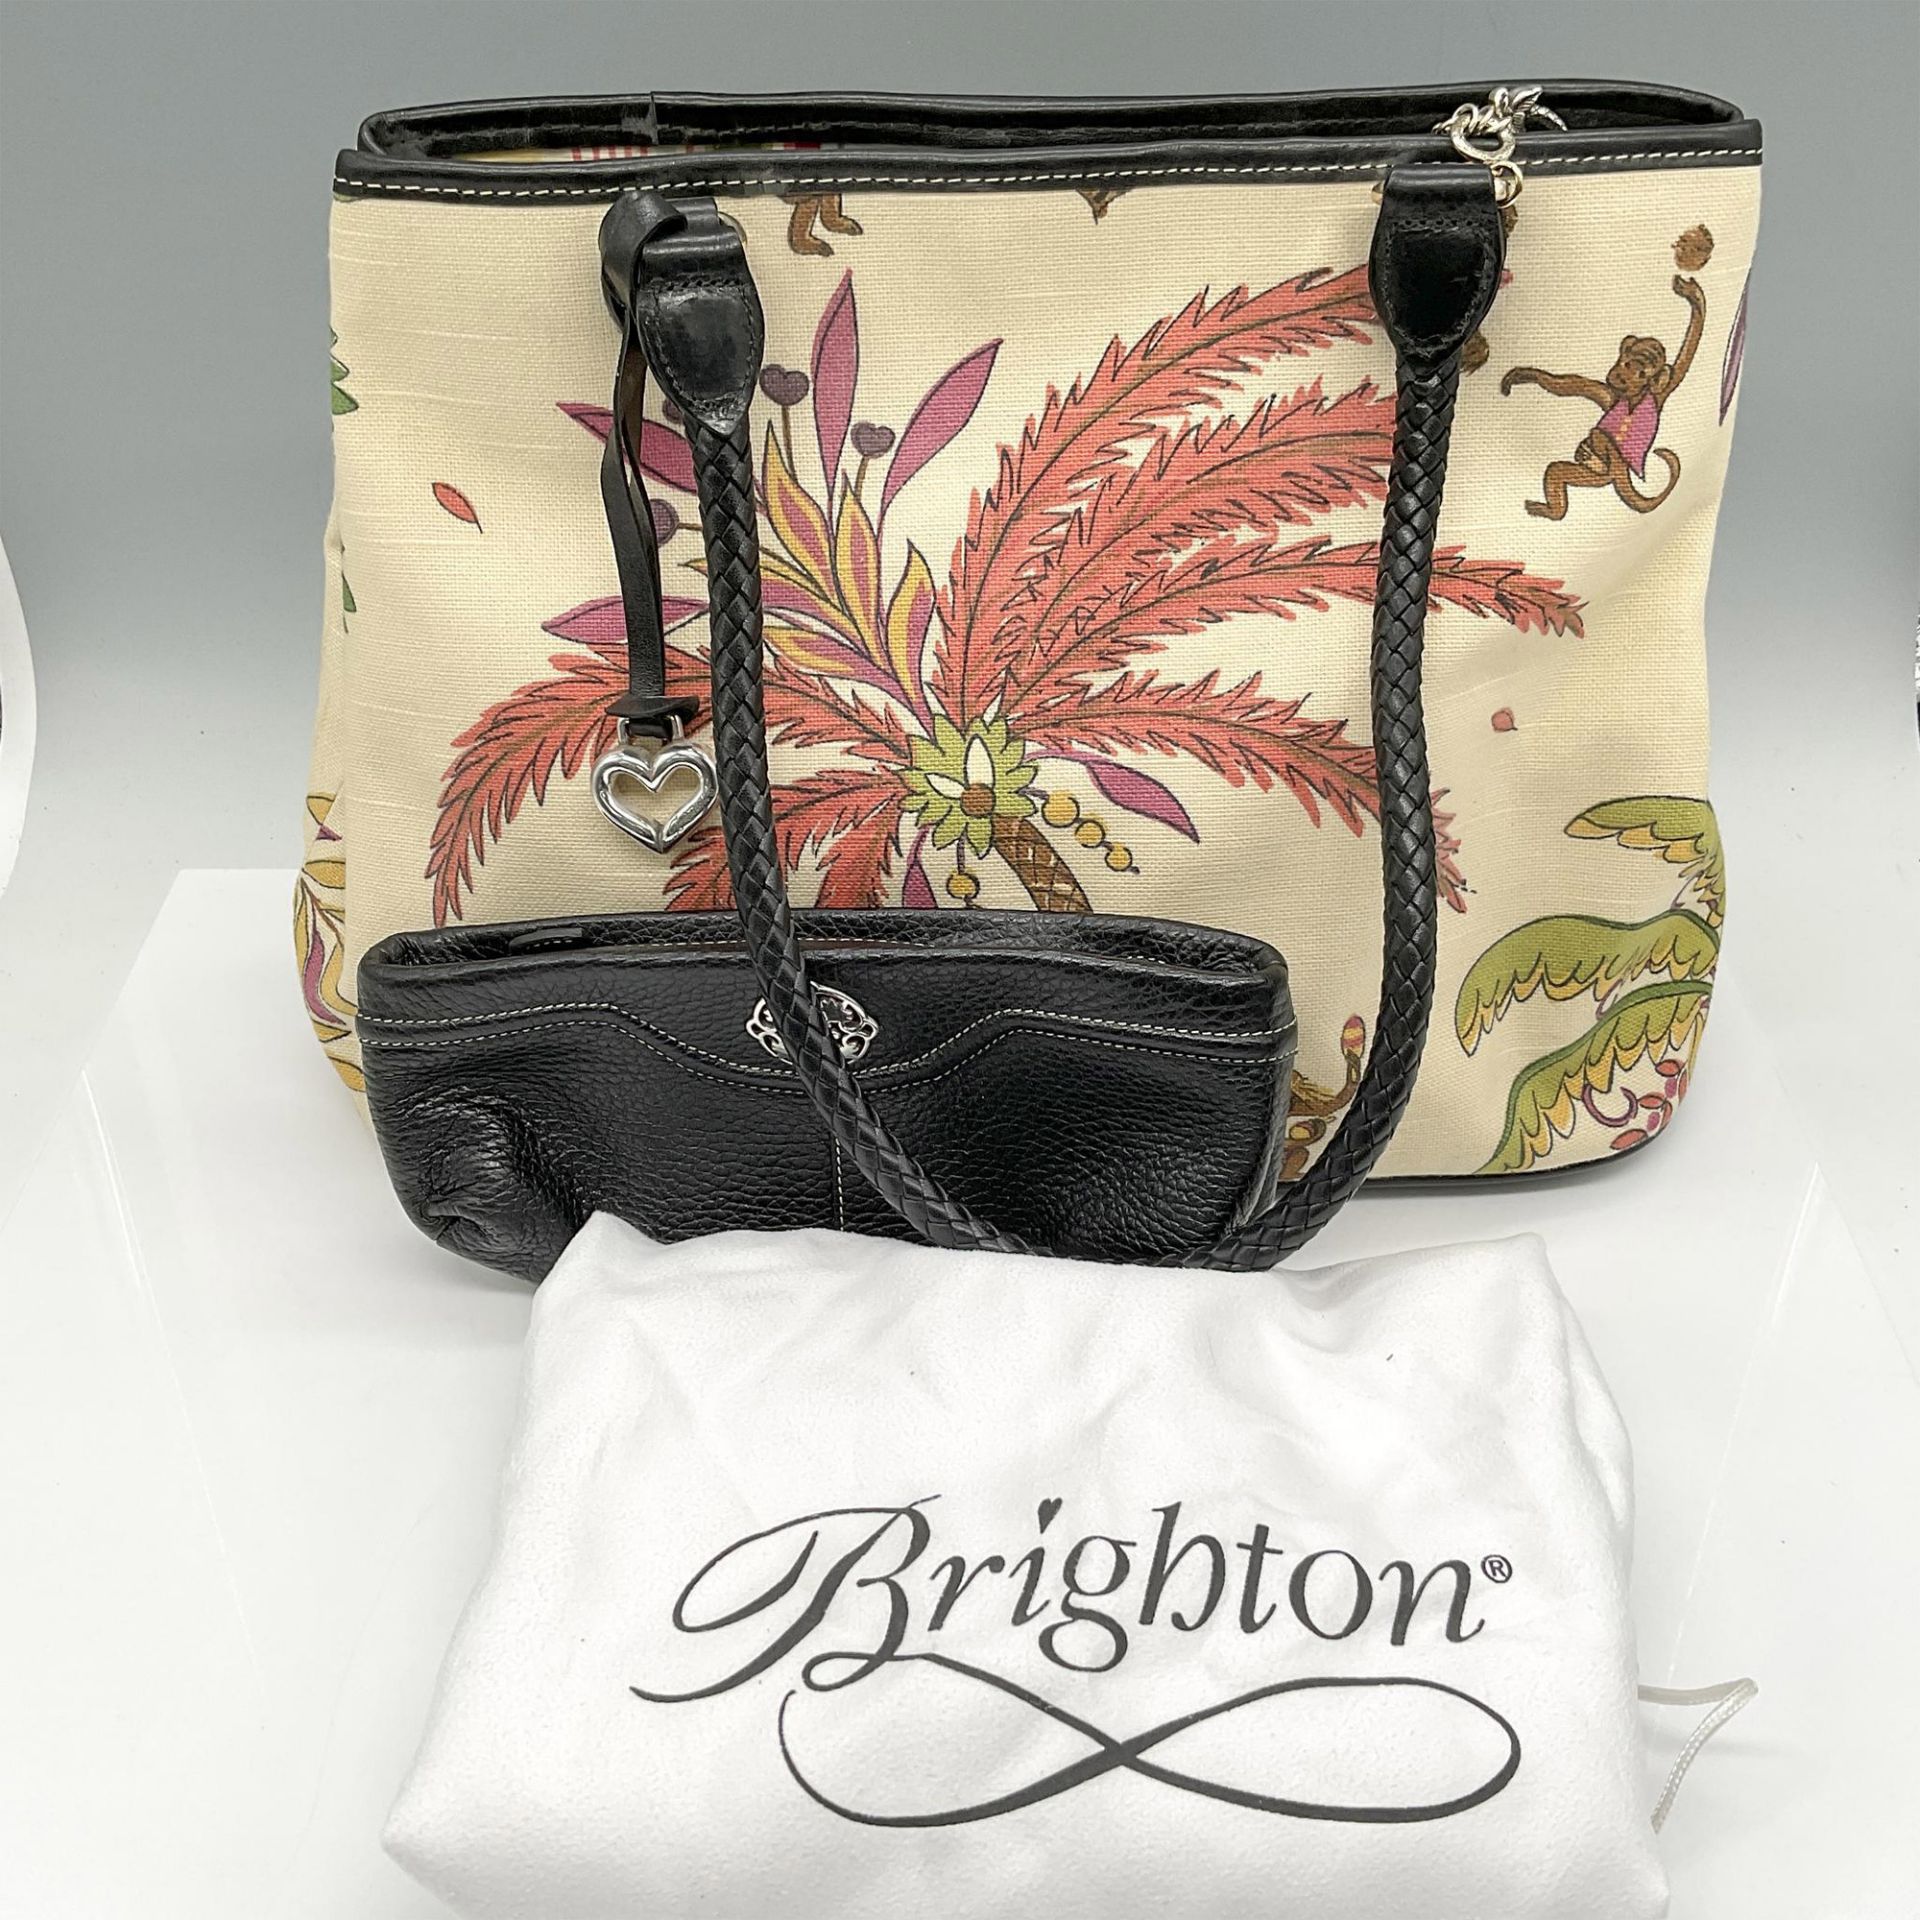 2pc Brighton Canvas and Leather Tote Bag + Case - Image 4 of 4